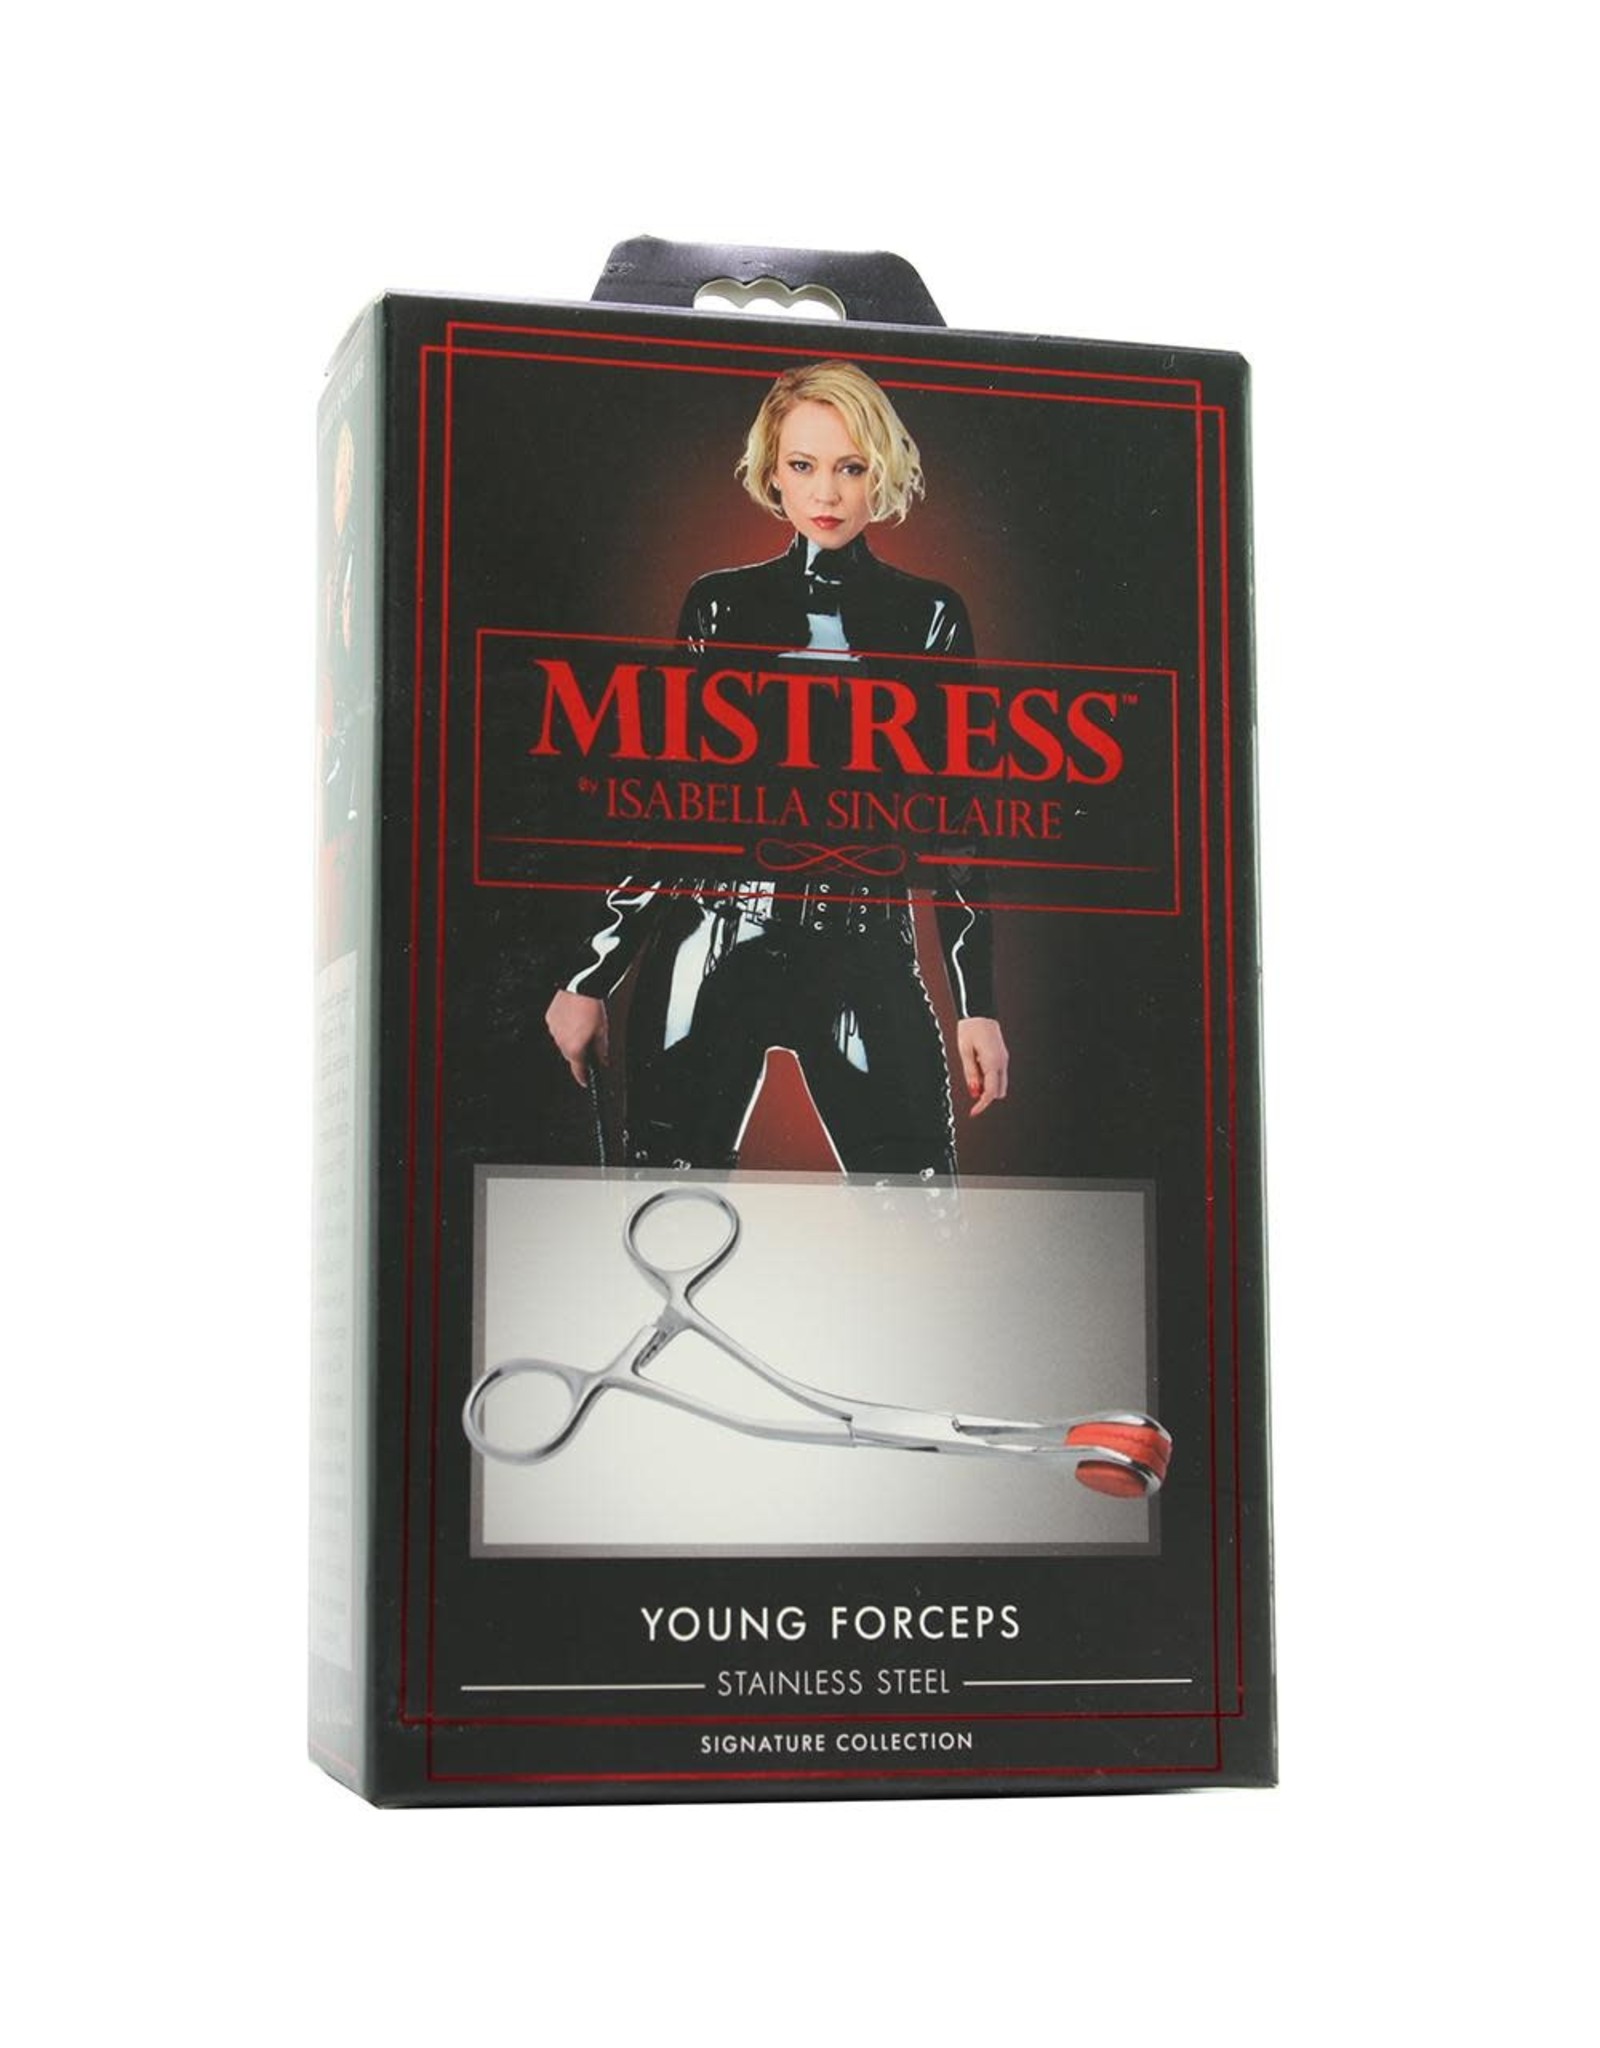 XR BRANDS MISTRESS ISABELLA SINCLAIRE - STAINLESS STEEL YOUNG FORCEPS